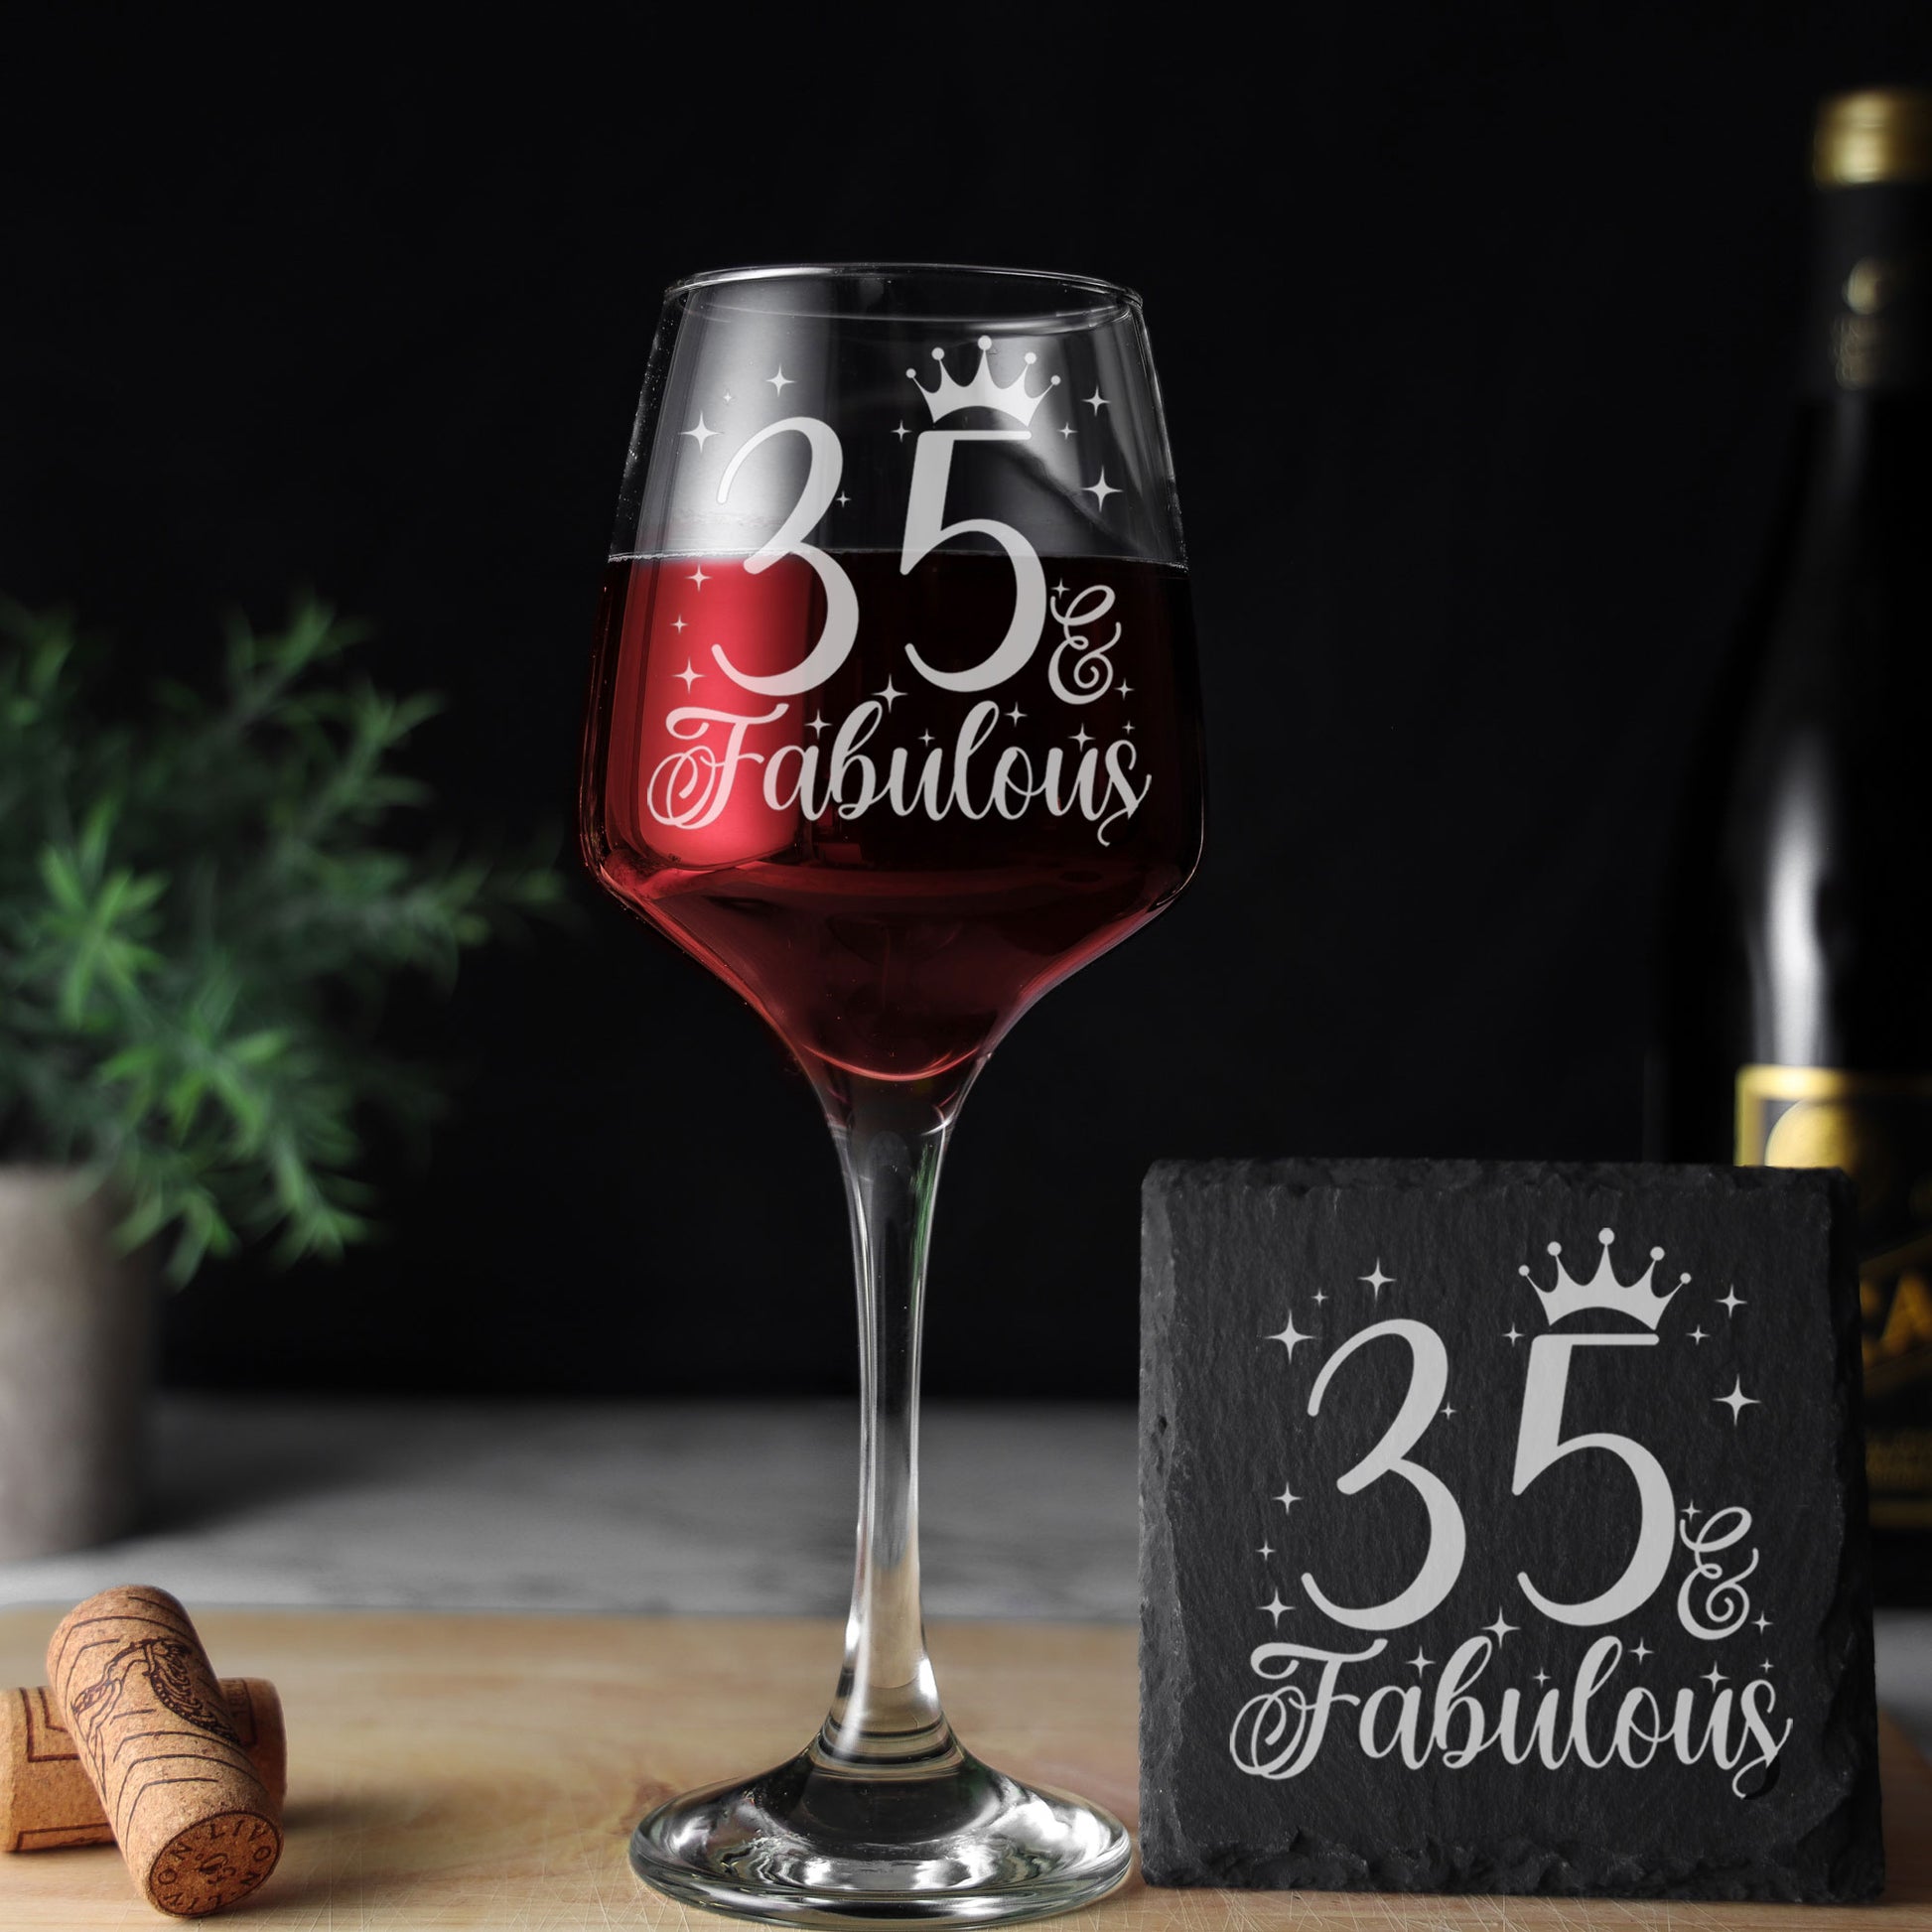 35 & Fabulous 35th Birthday Gift Engraved Wine Glass and/or Coaster Set  - Always Looking Good - Glass & Square Coaster  